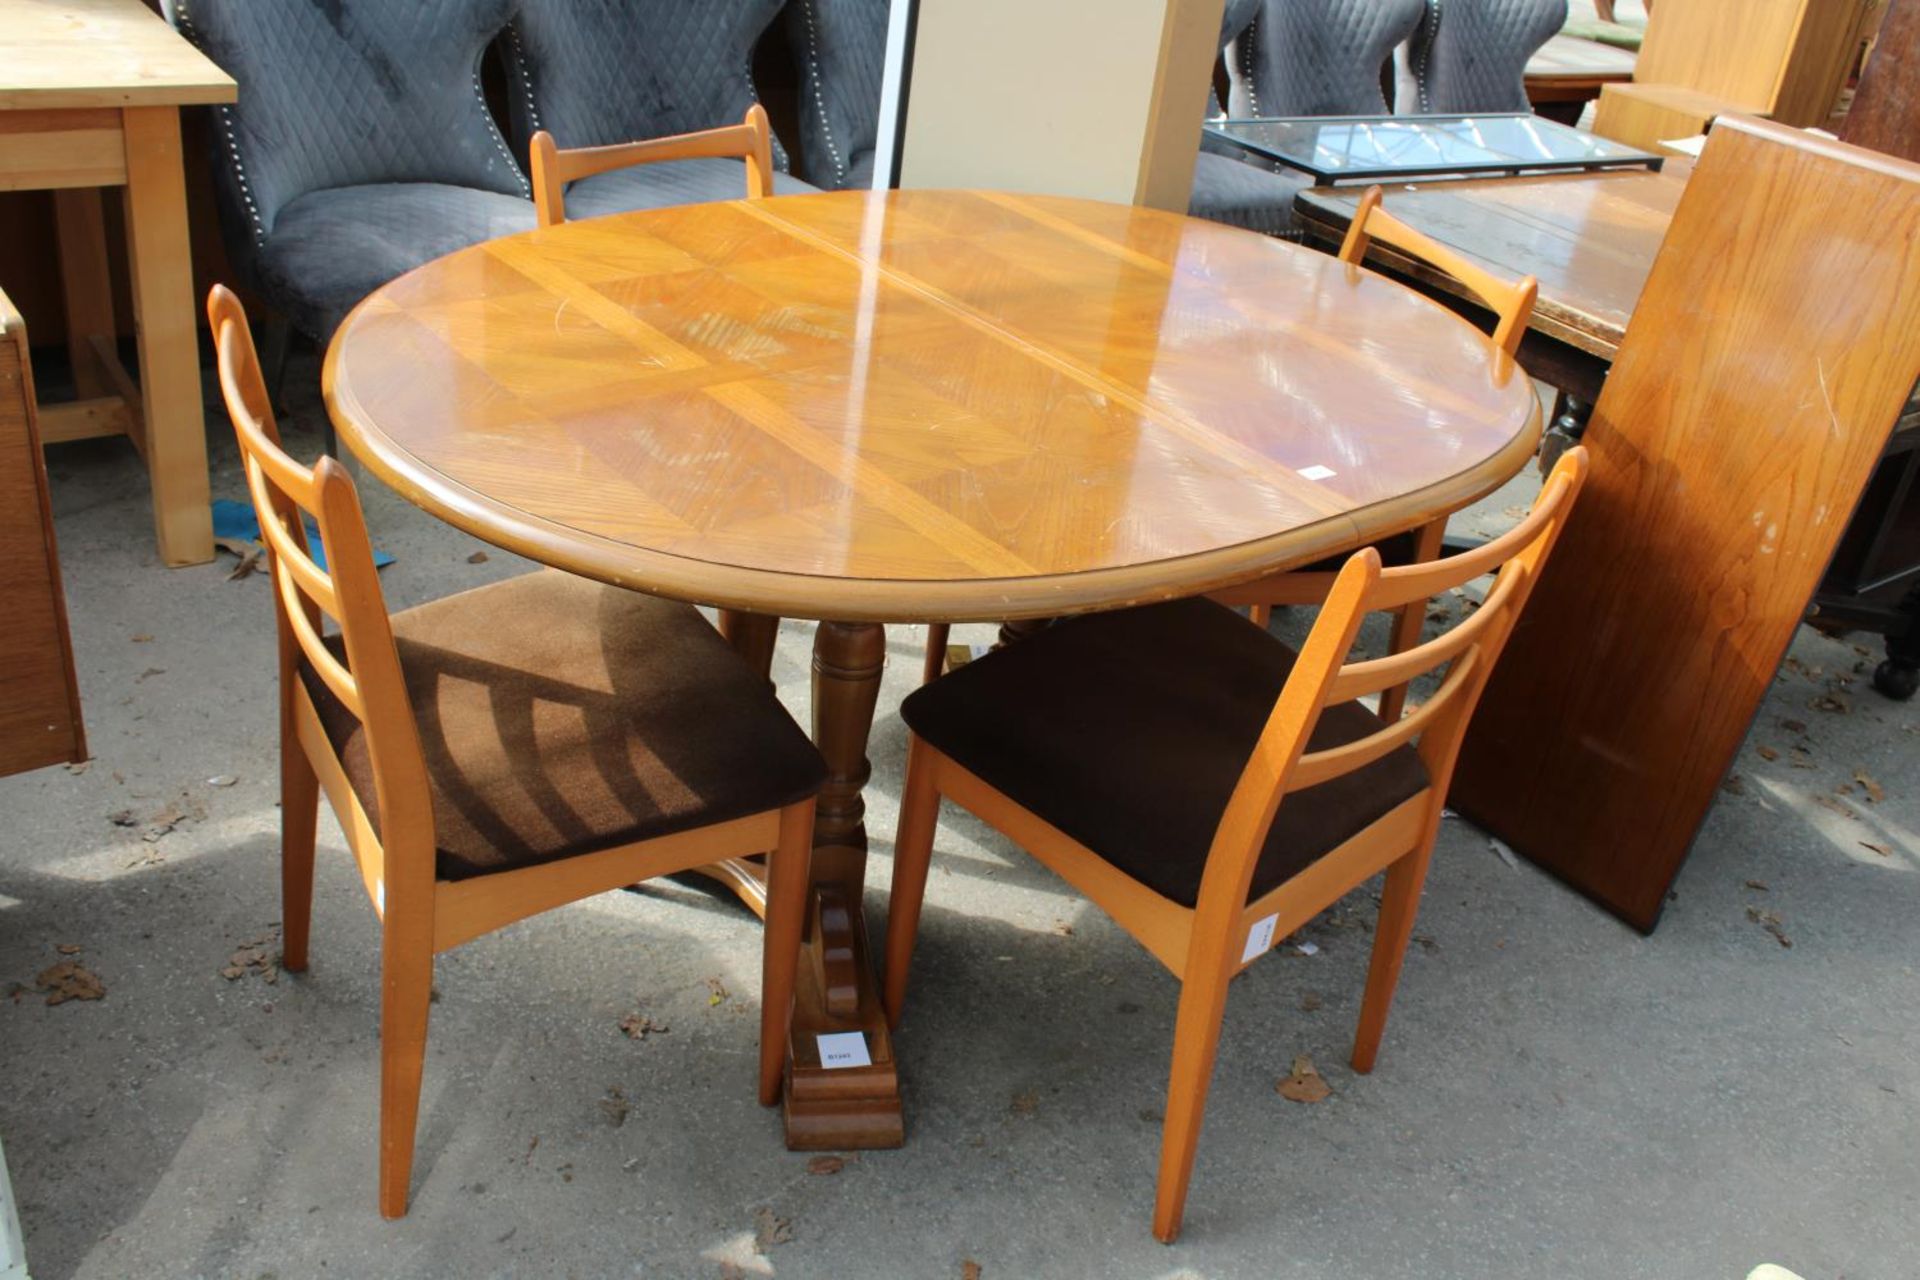 A MODERN TWIN-PEDESTAL EXTENDING DINING TABLE, 56" X 41" (LEAF 15") AND 4 SCHREIBER DINING CHAIRS